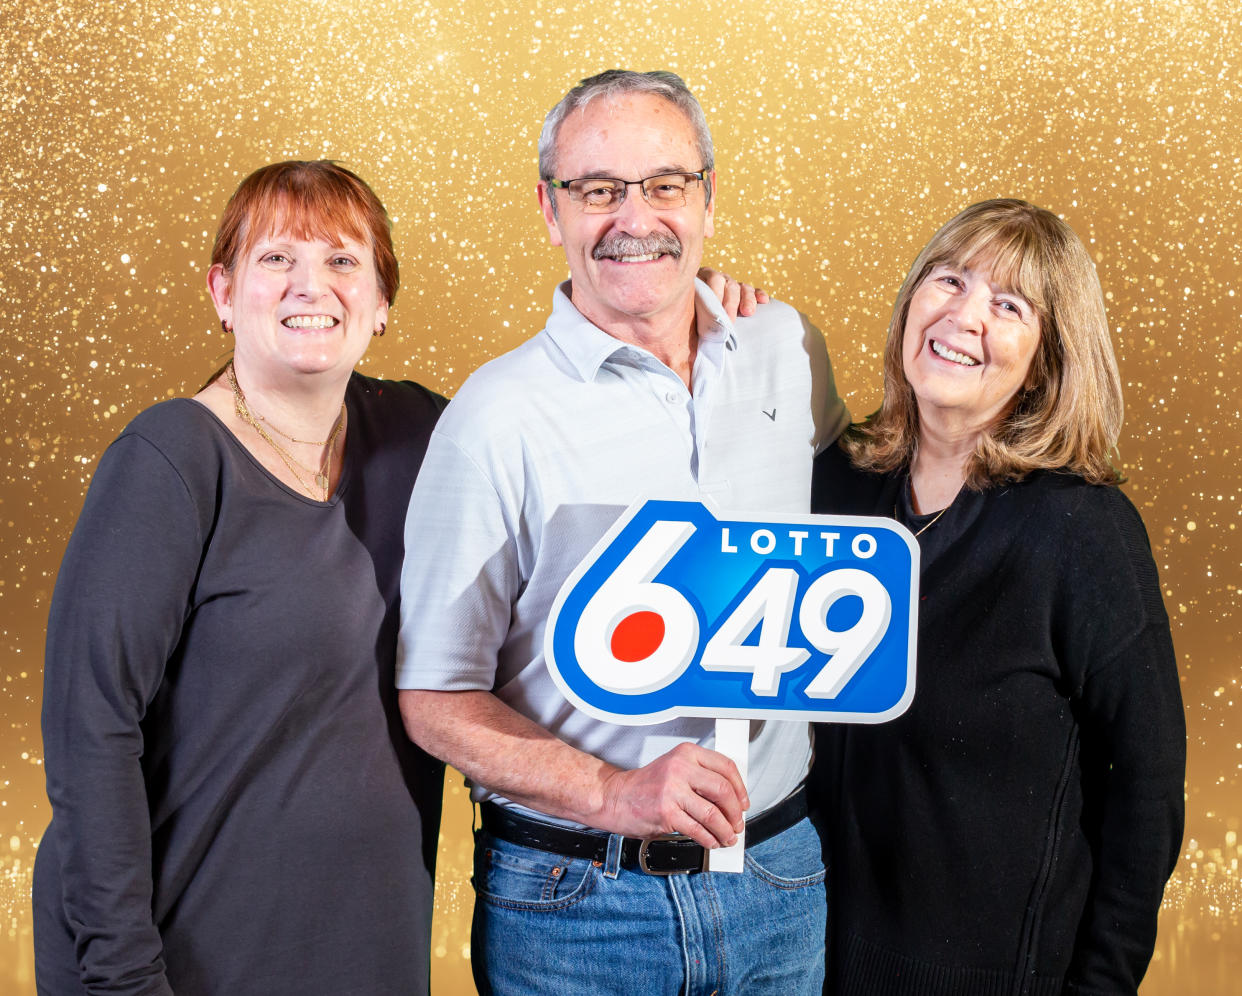 Three recent lottery winners standing with a Lotto 6/49 sign in front of a gold background.